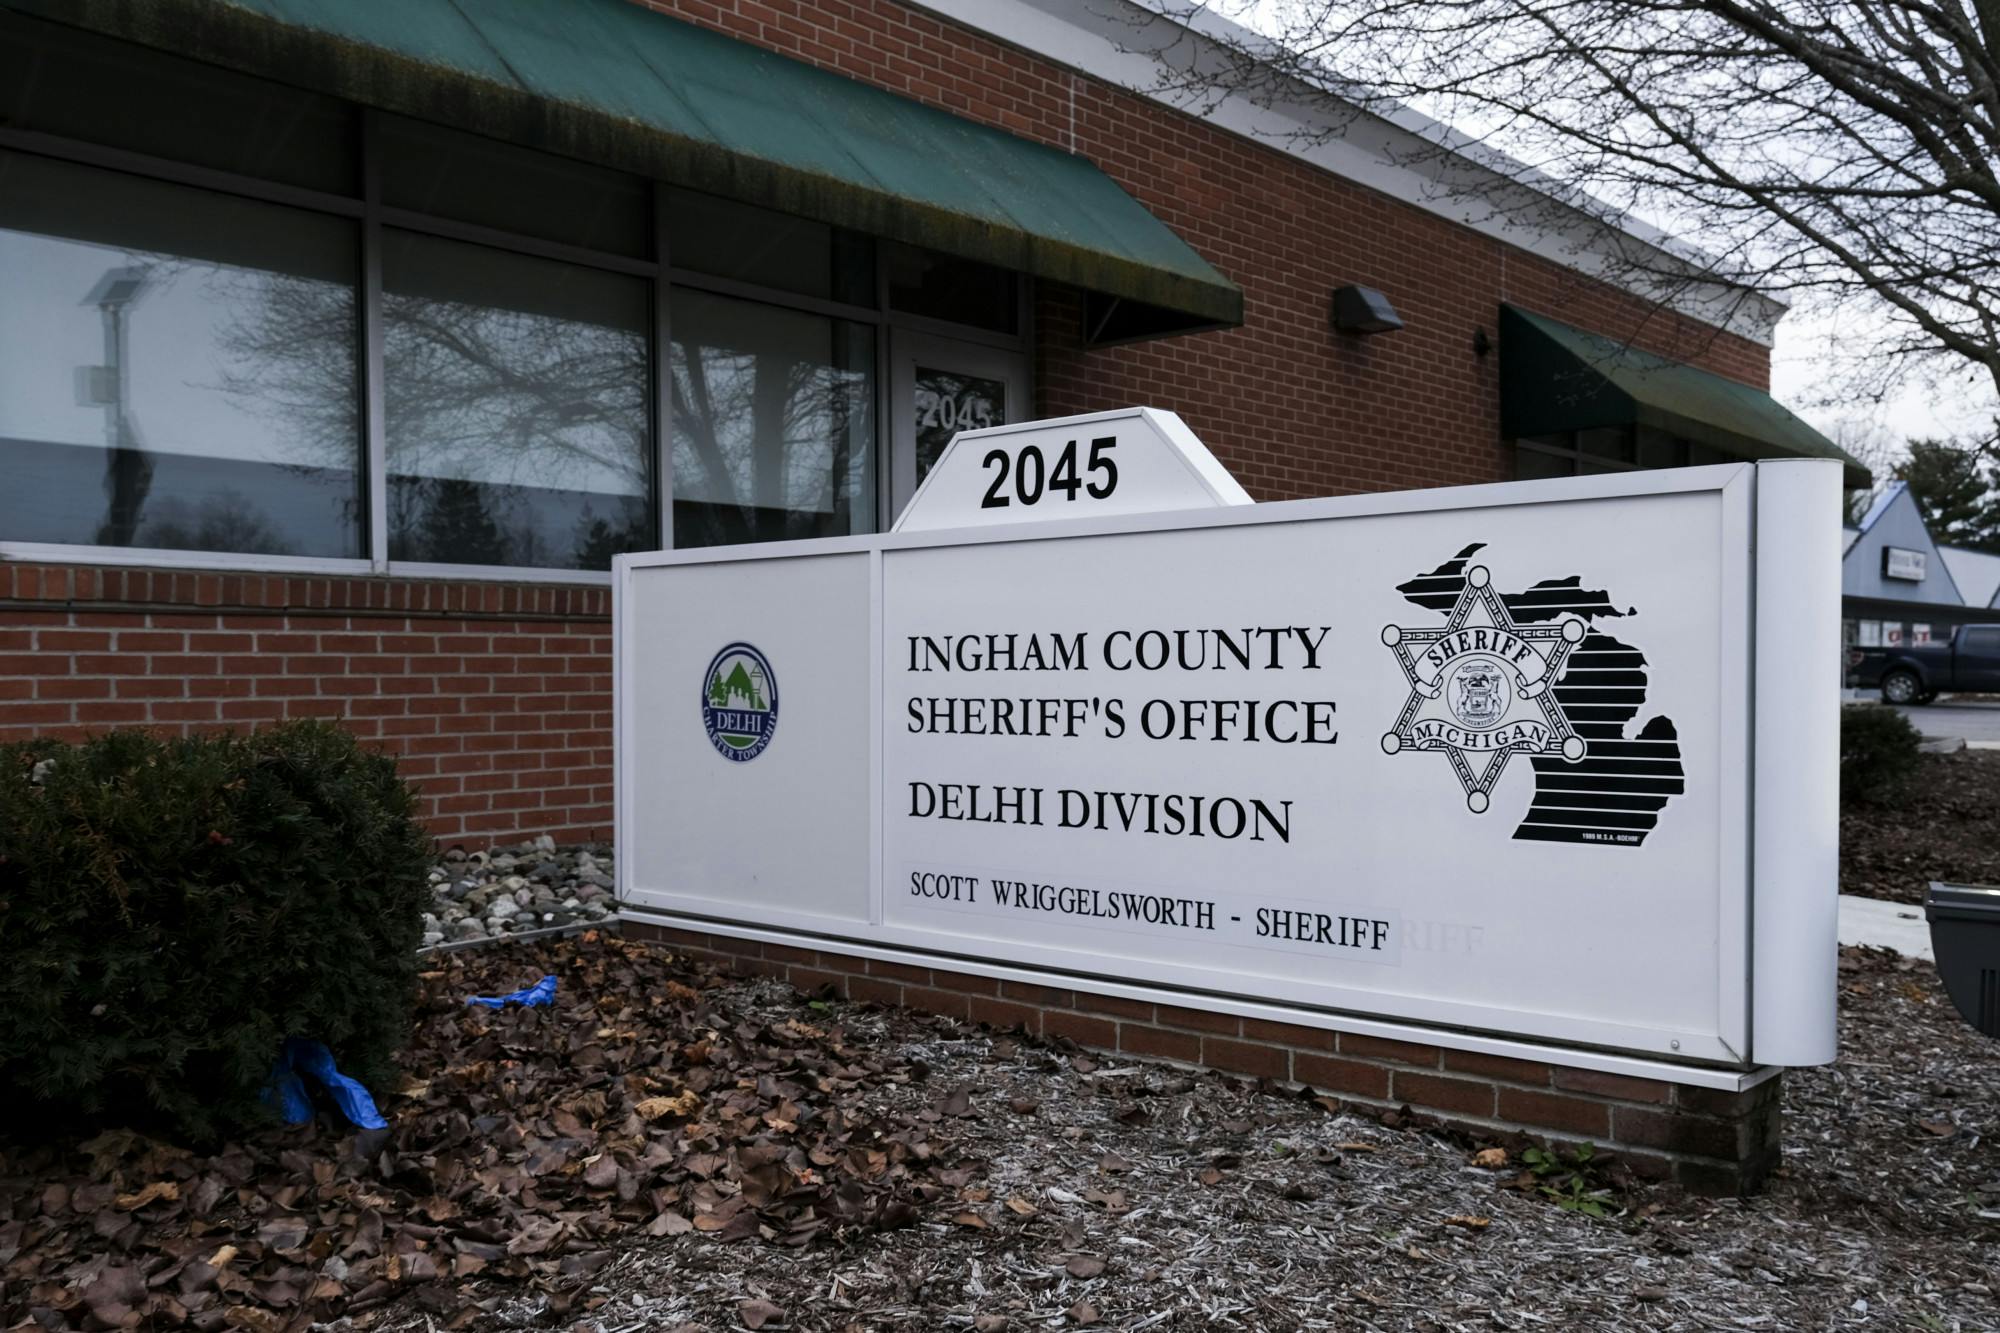 The Ingham County Sheriff's Office on December 03, 2020.